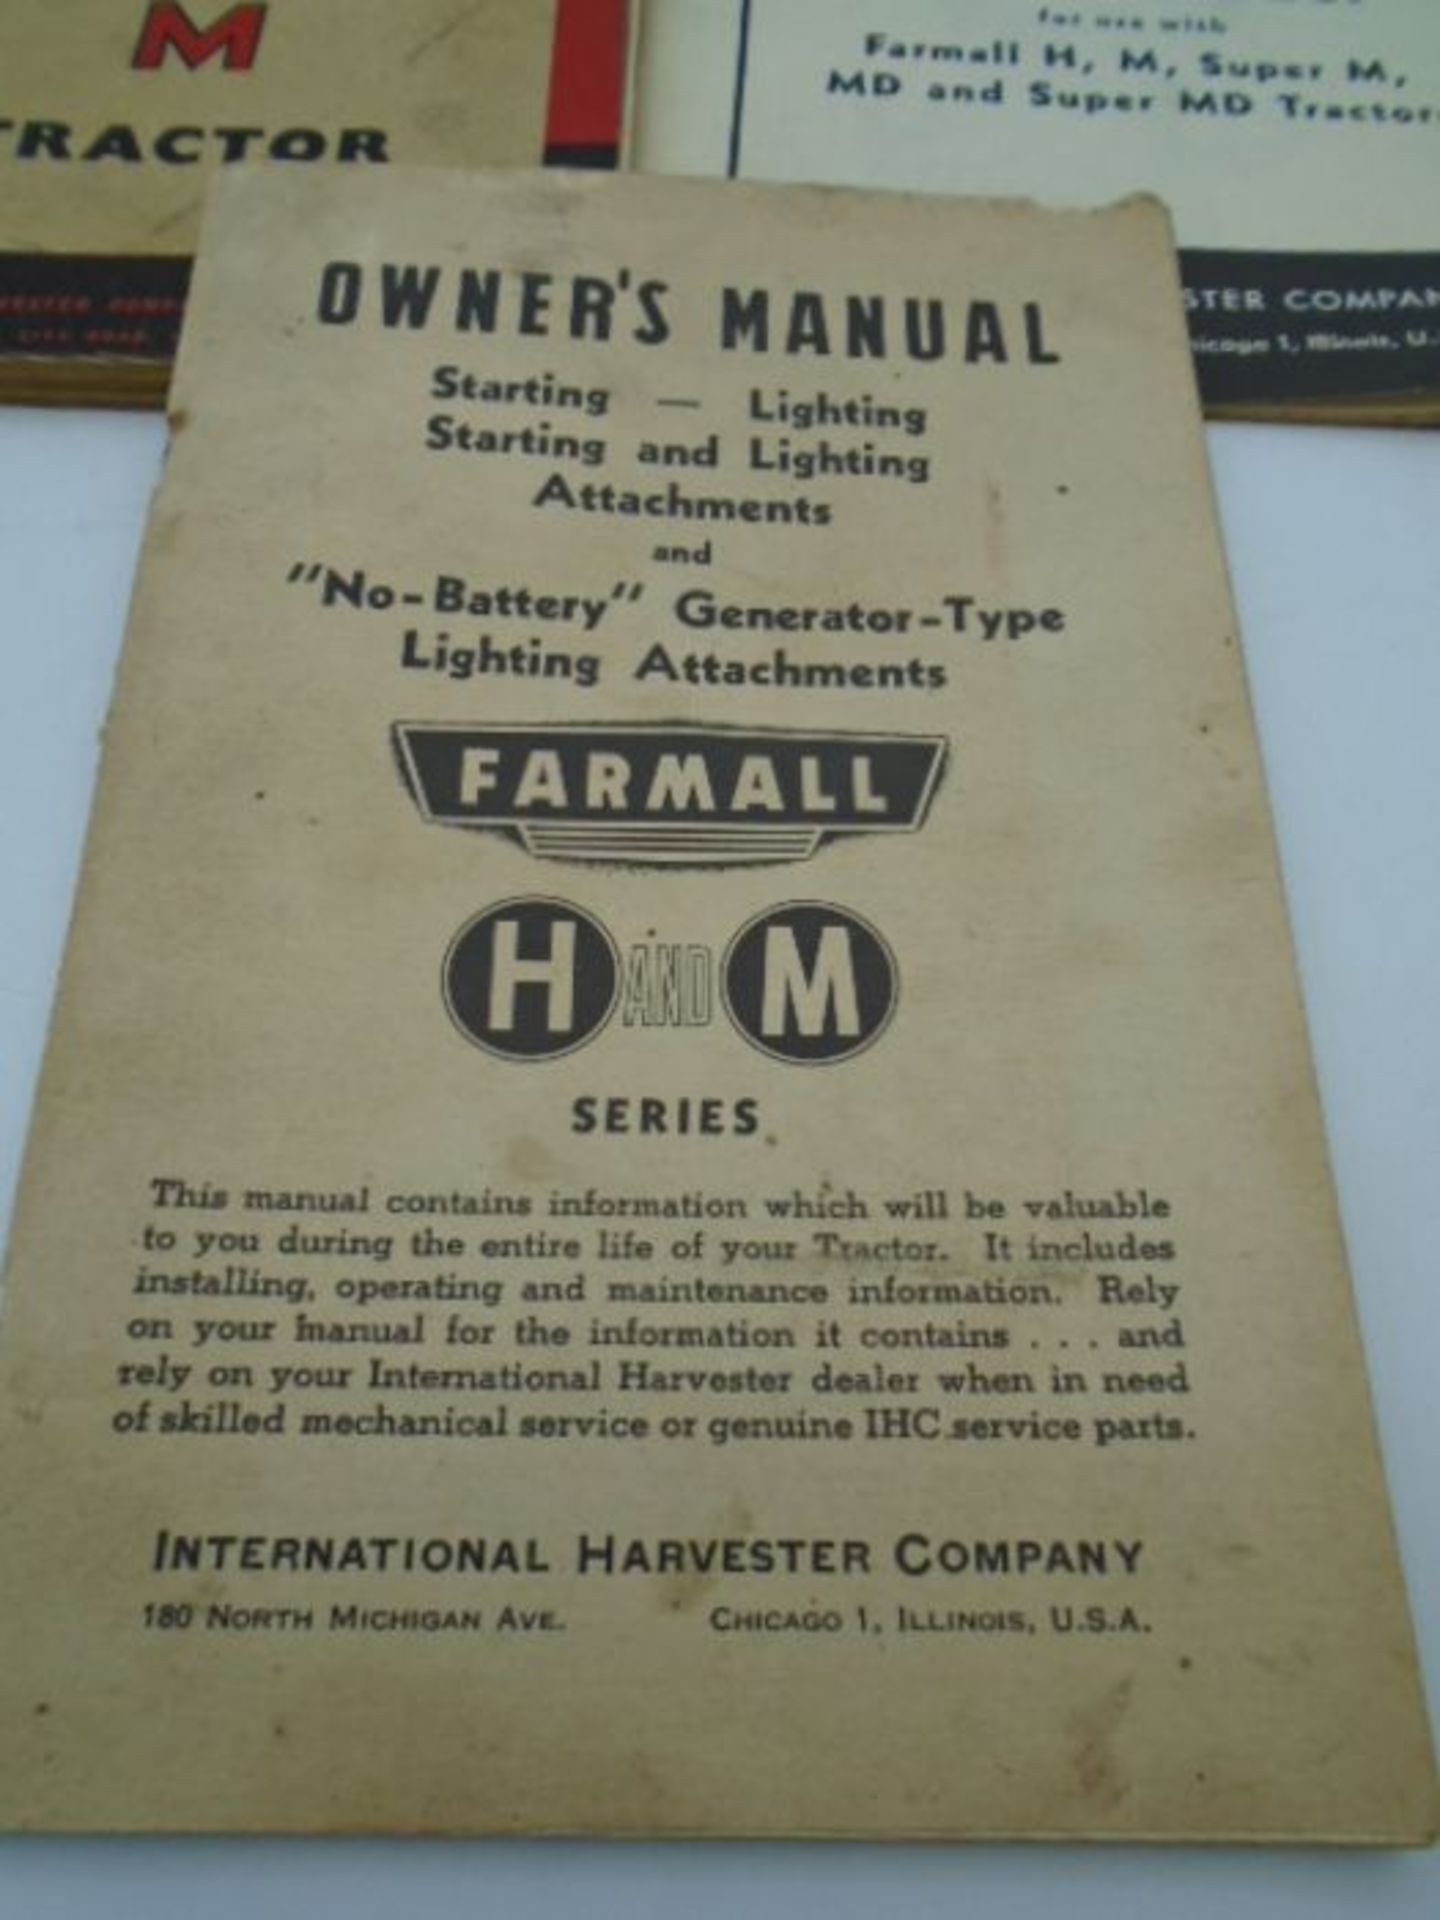 3 owners manuals - 'M' tractor plus 2 others - Image 3 of 4